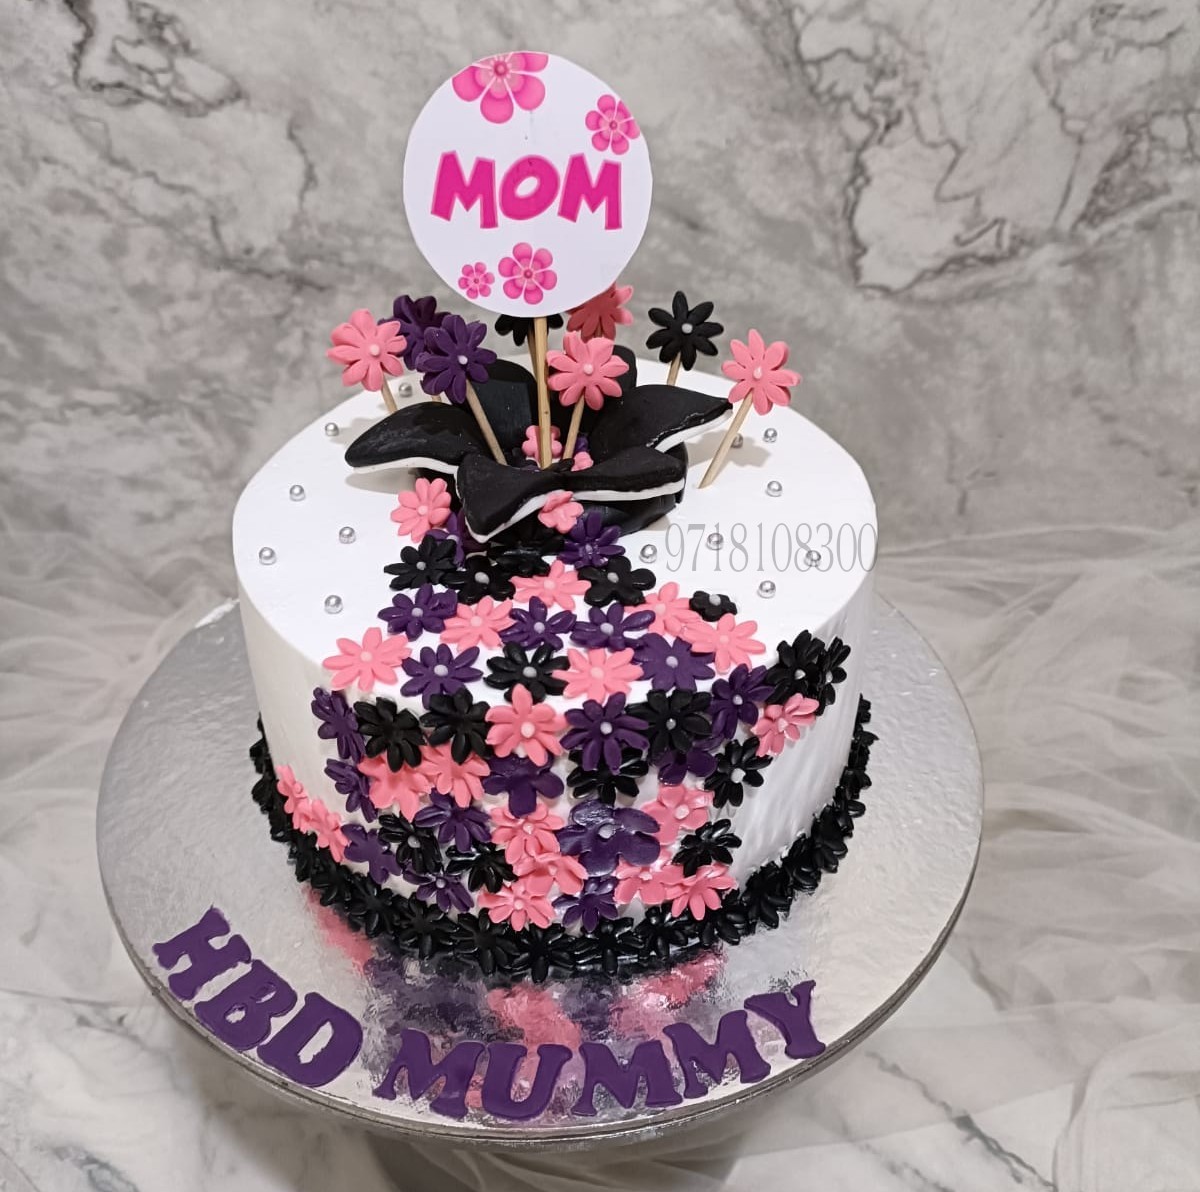 Mom Theme Cake by Creme Castle